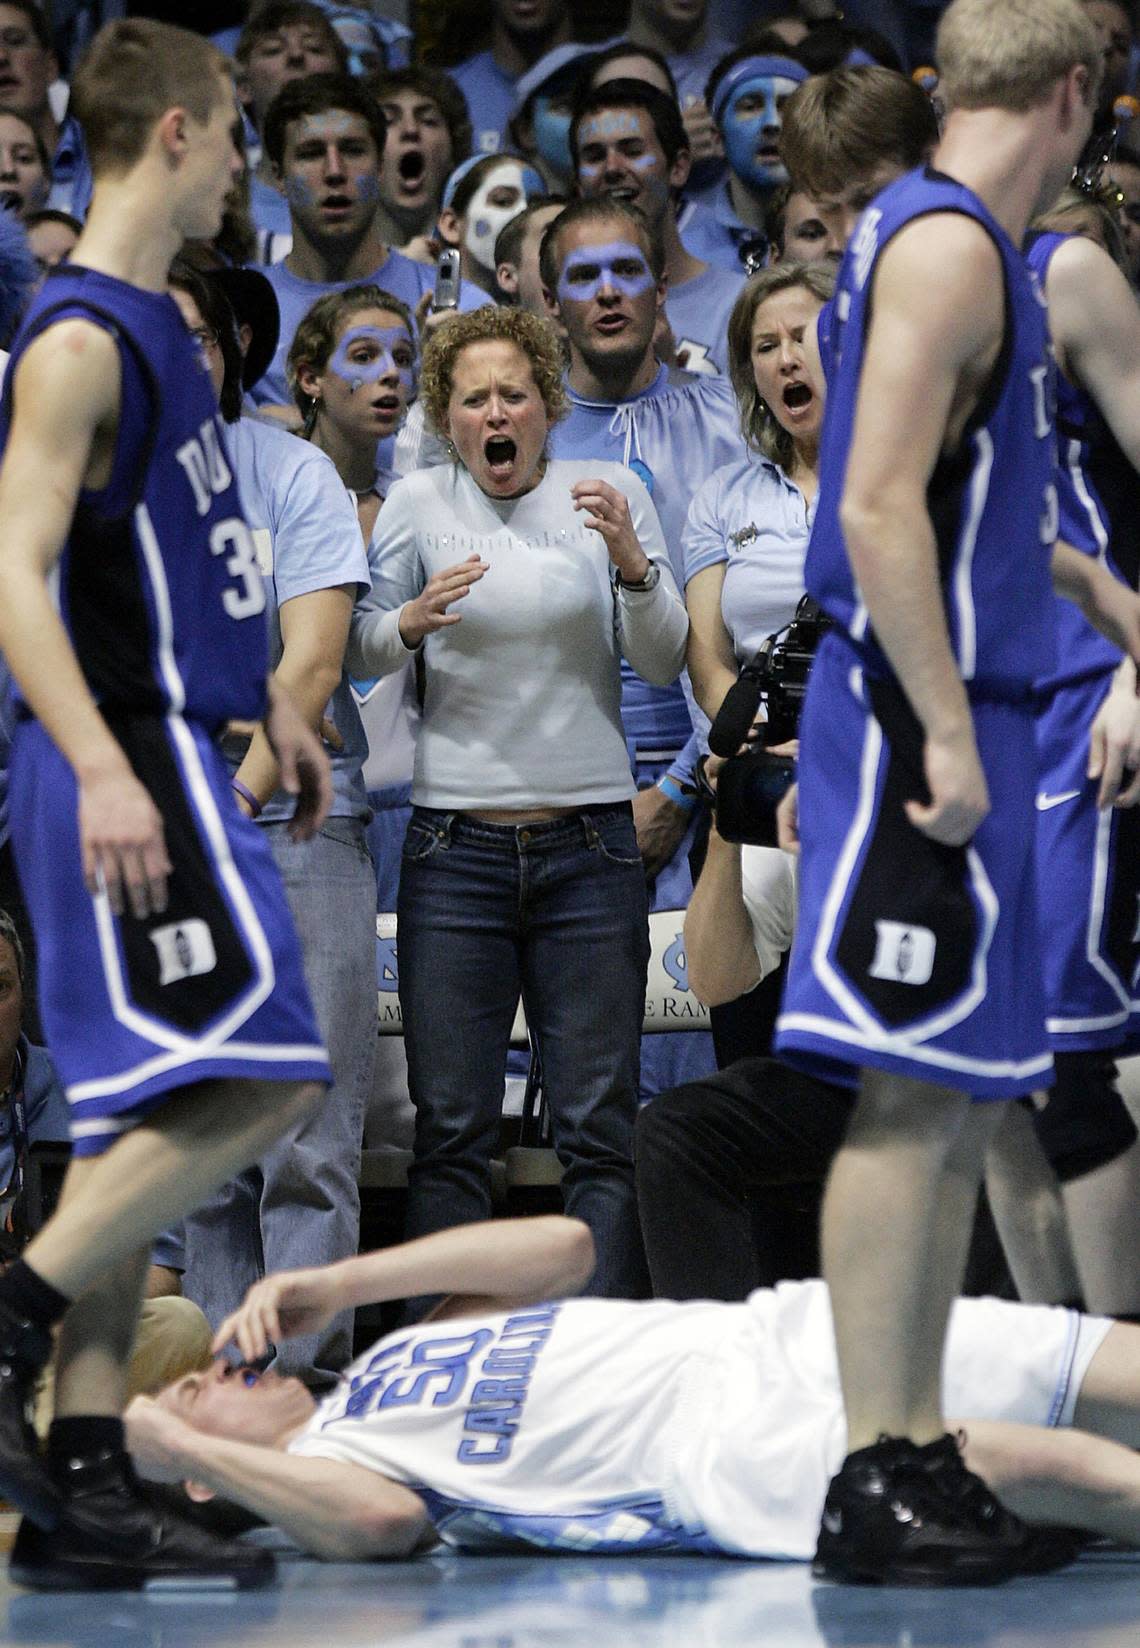 UNC fans react after a flagrant foul by Duke’s Gerald Henderson (not pictured) knocked down UNC’s Tyler Hansbrough late during the second half of a March 4, 2007 game in Chapel Hill. Duke’s Henderson was ejected from the game. UNC won, 86-72. Ted Richardson/File photo